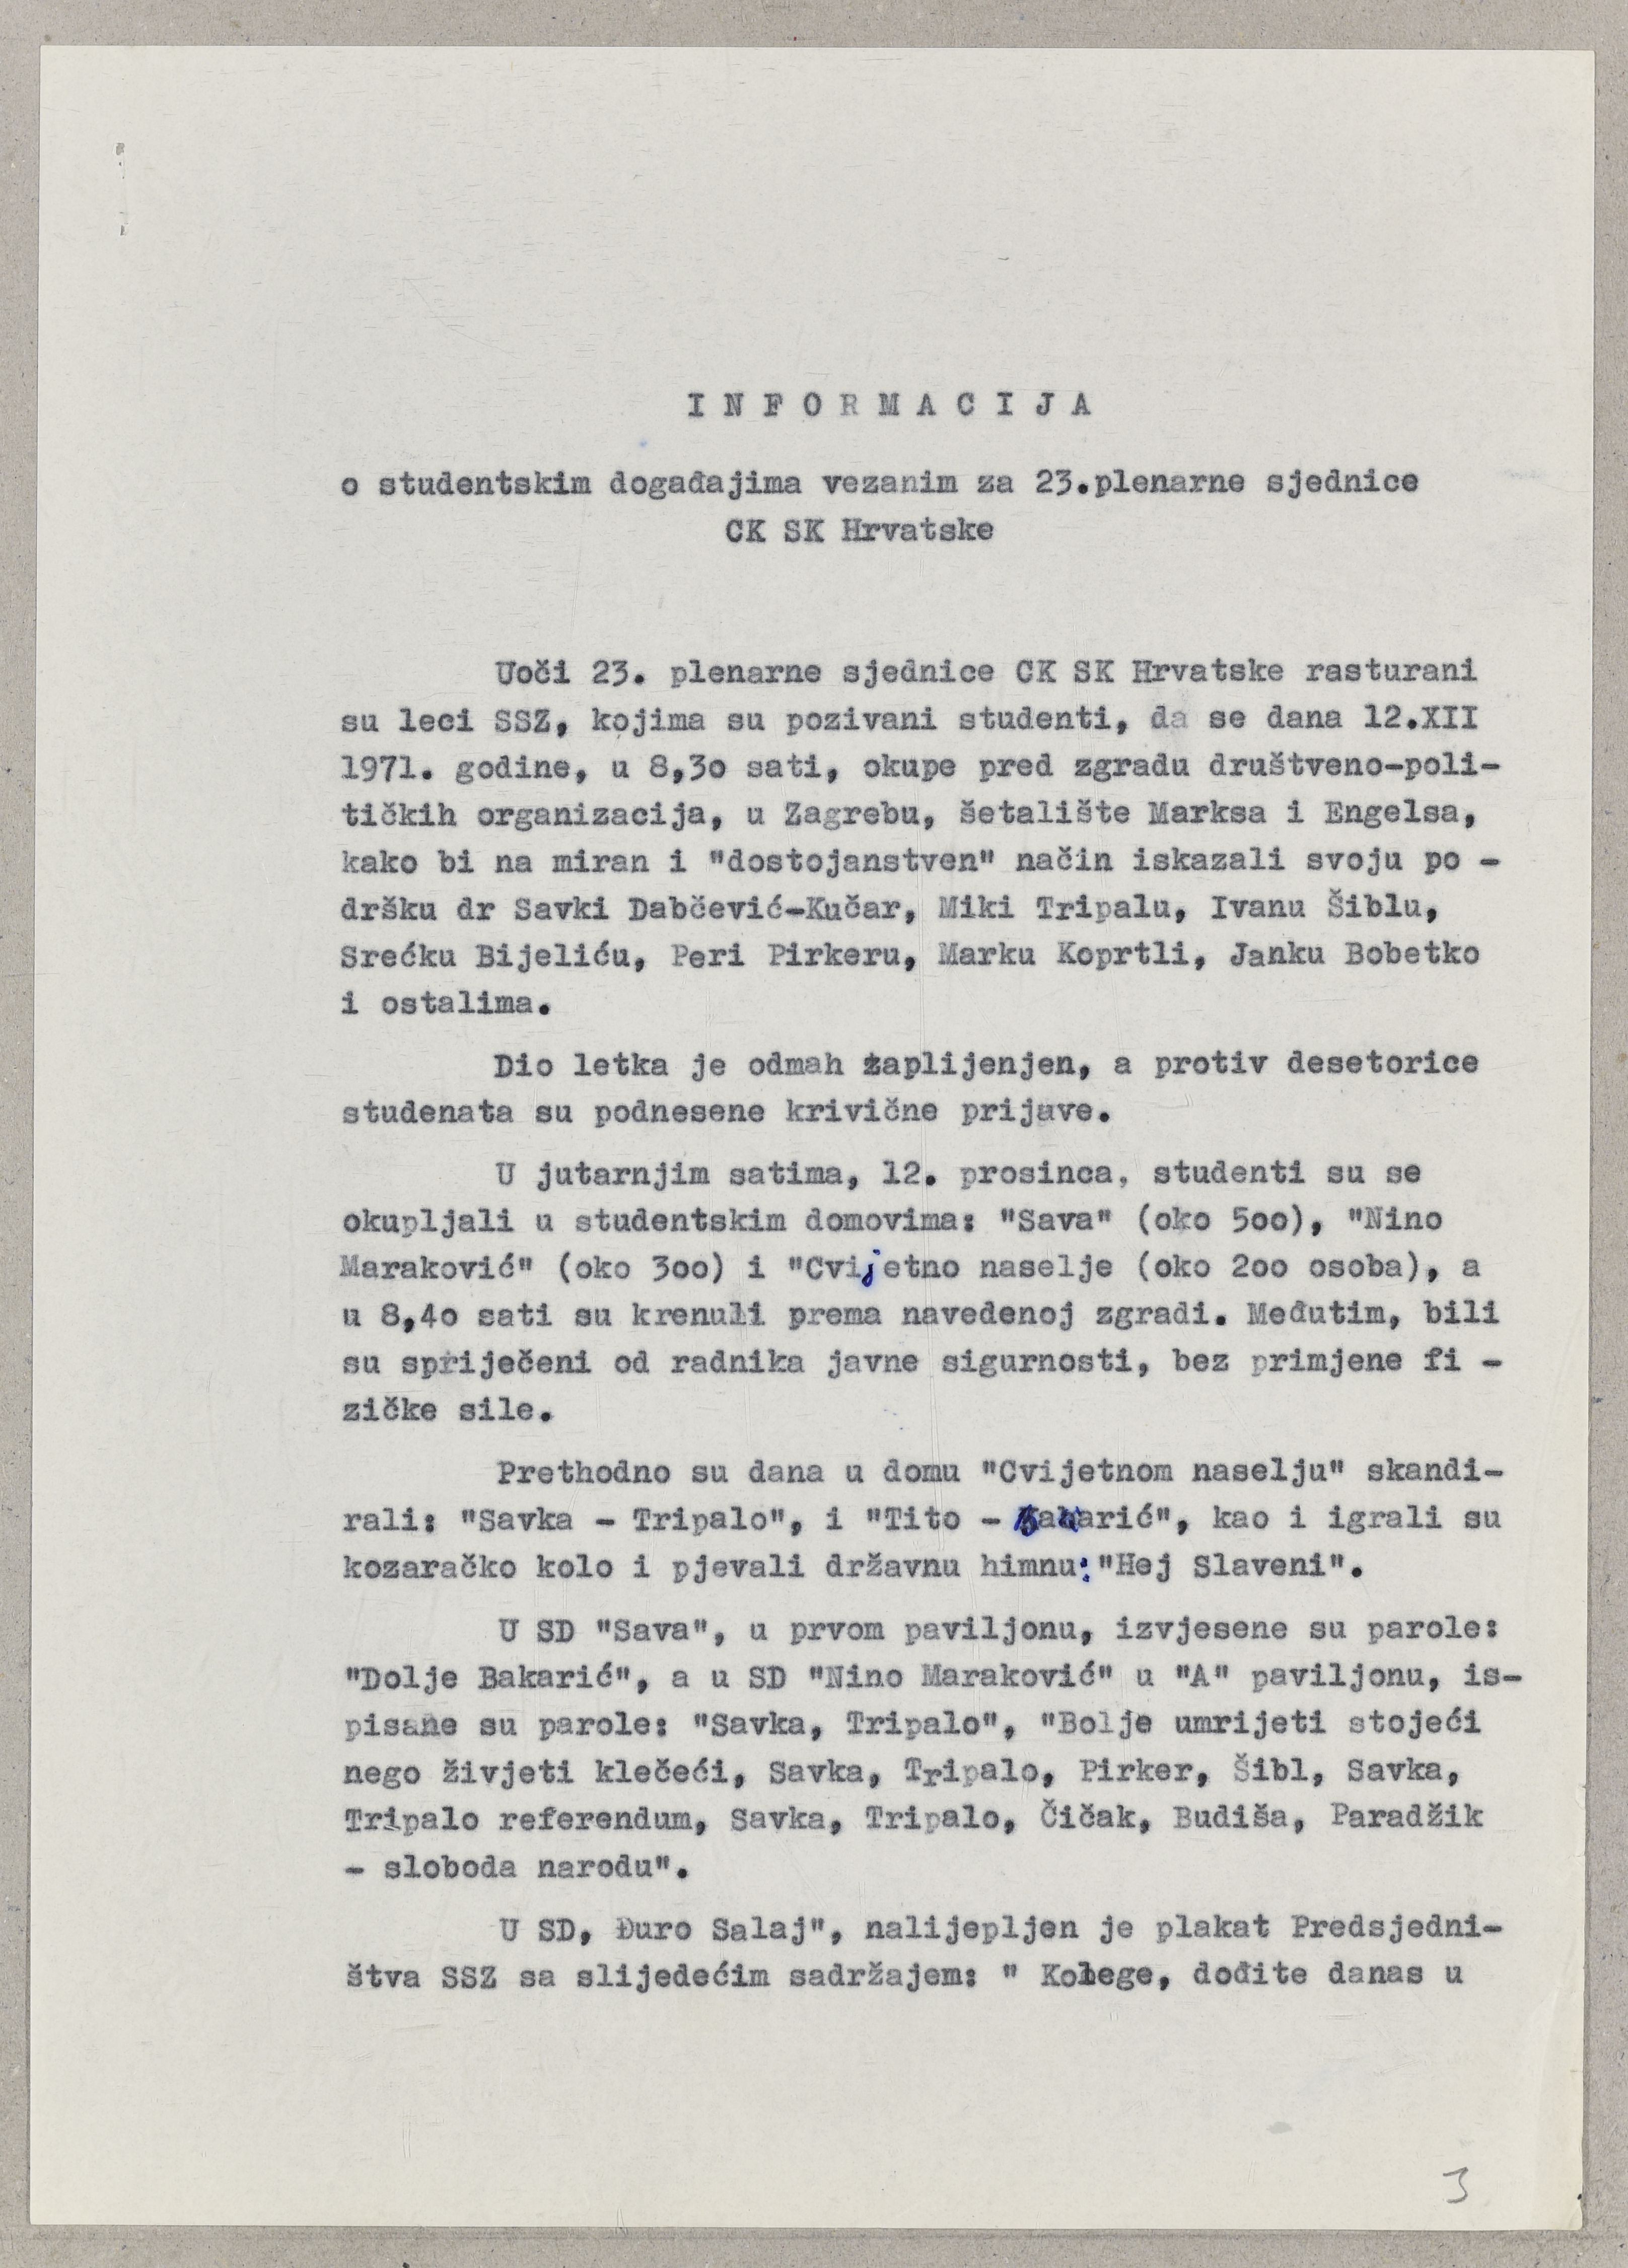 Information on student activities related to the 23rd plenary session of the Central Committee of the League of Communists of Croatia. 13 December 1971. Archival document 